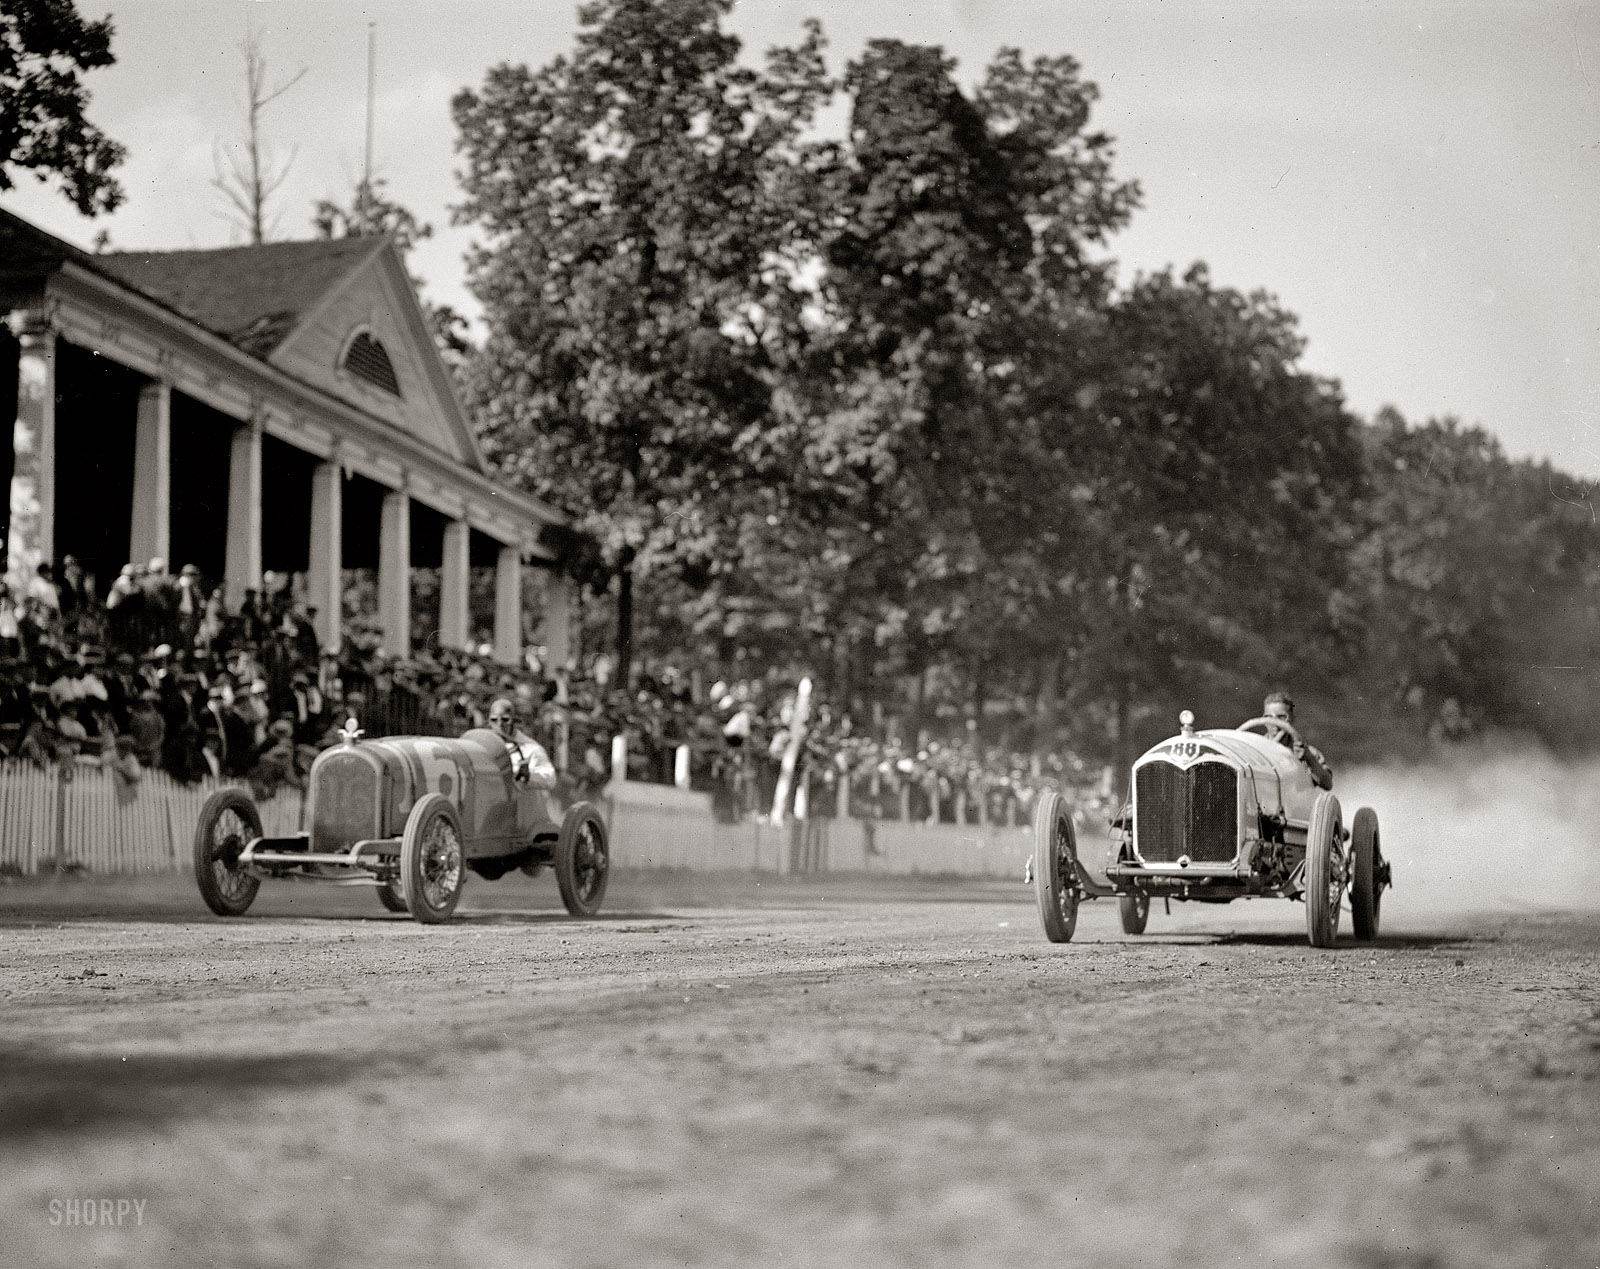 August 25, 1923. Montgomery County, Maryland. "Auto races, Rockville Fair." National Photo Company Collection glass negative. View full size.